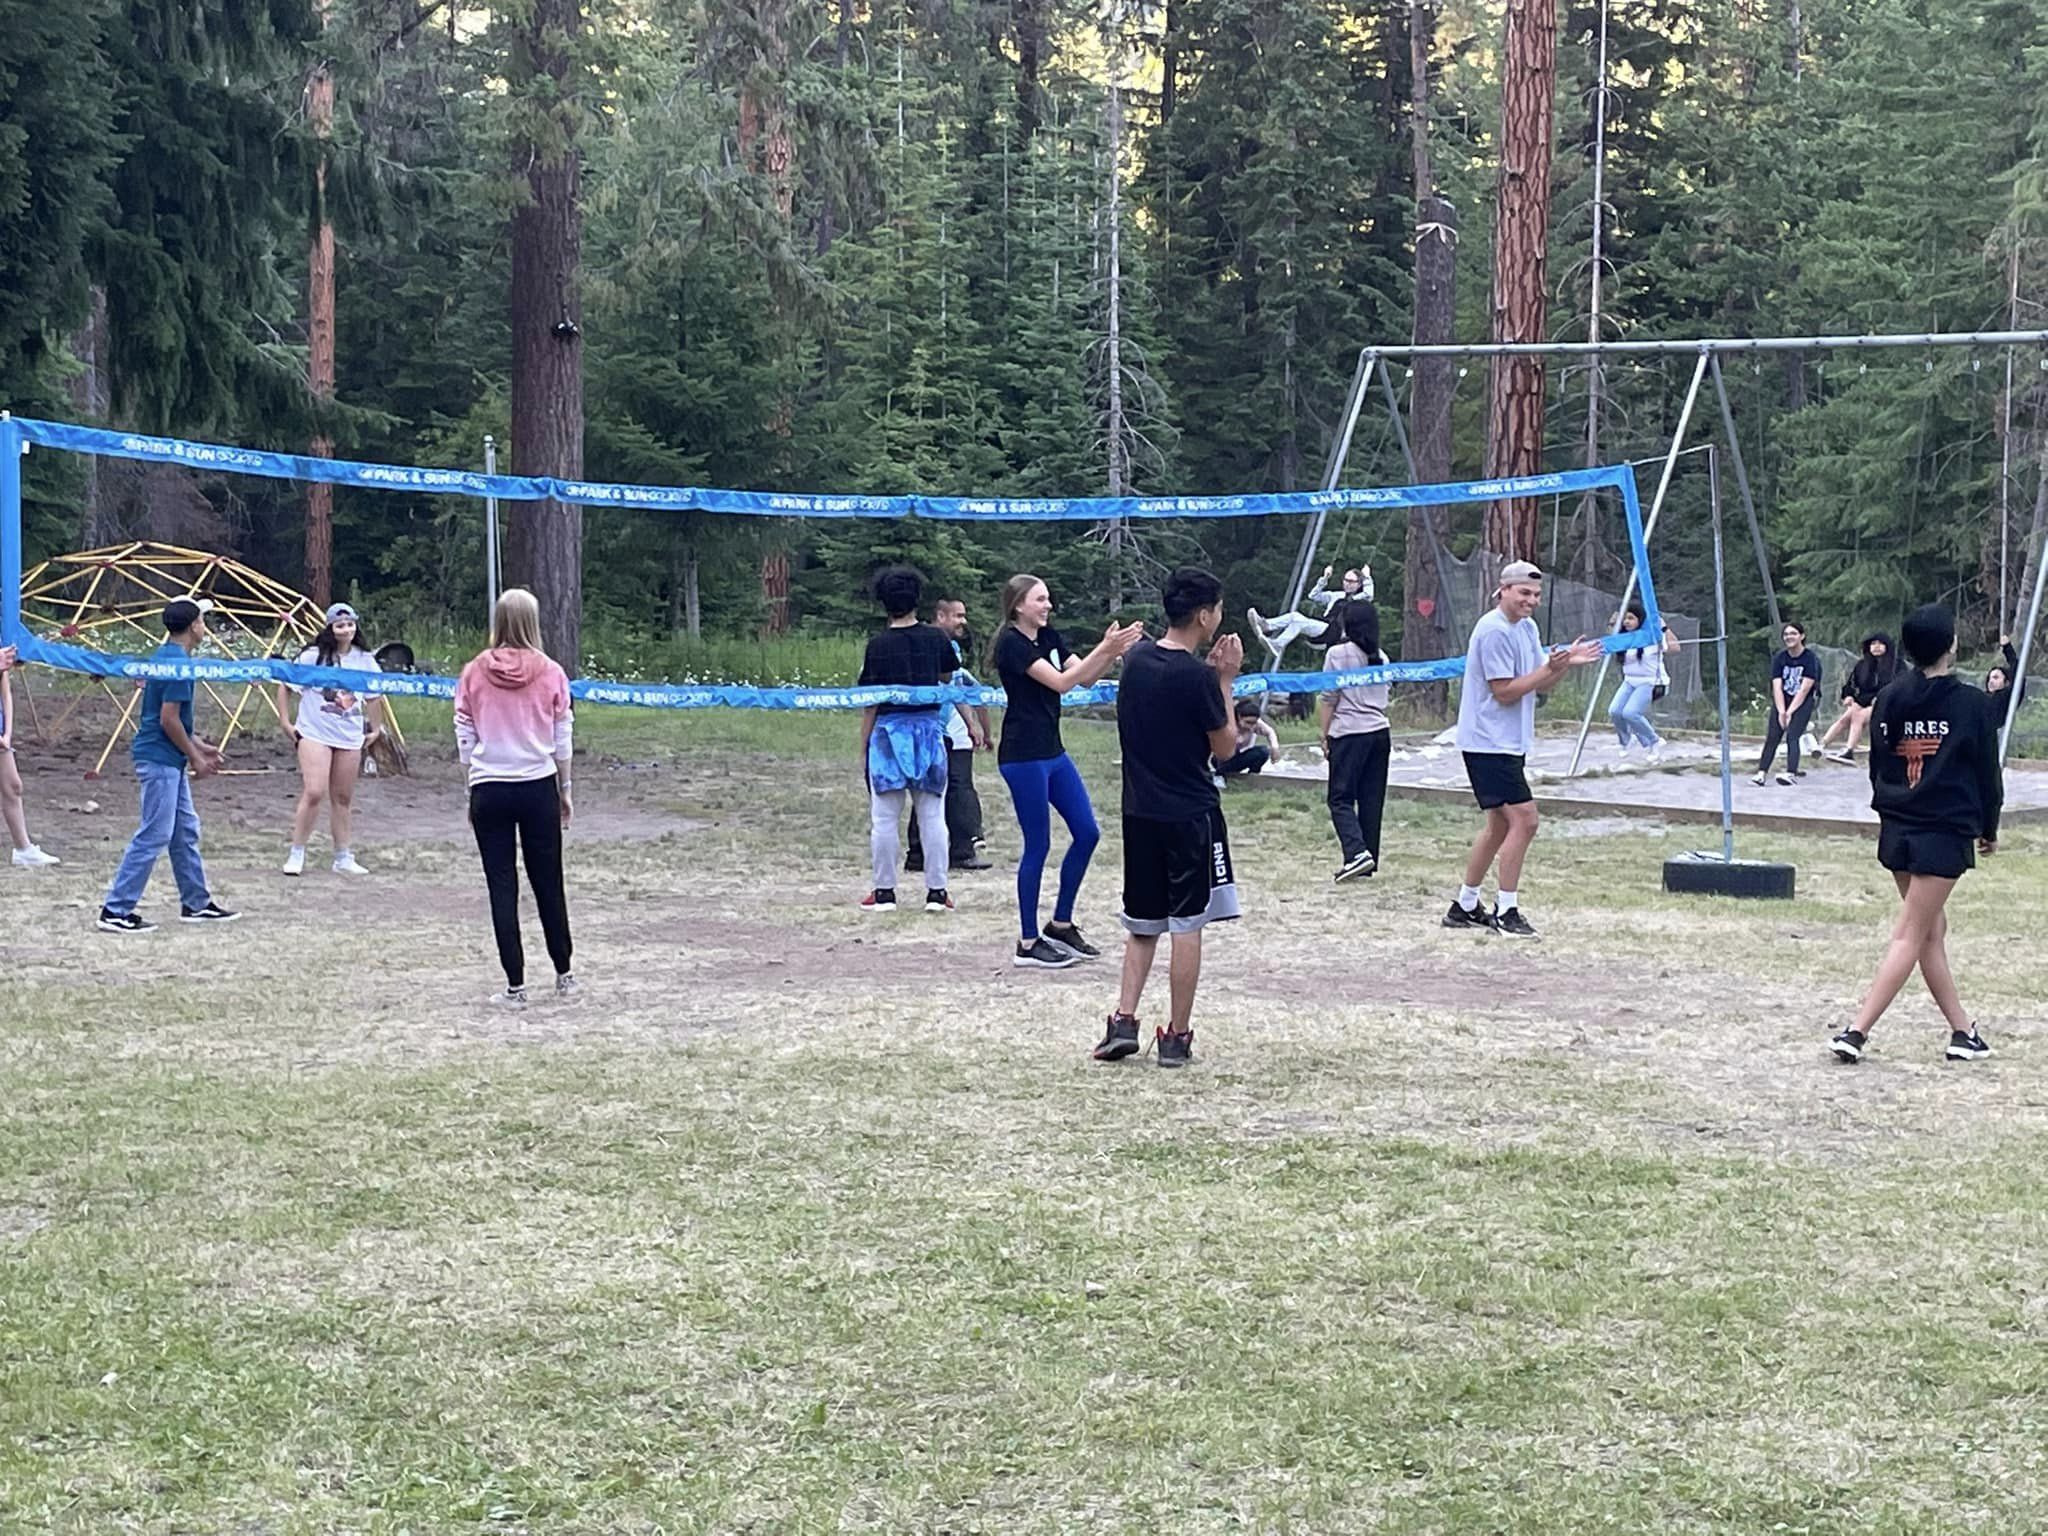 volleyball and swings